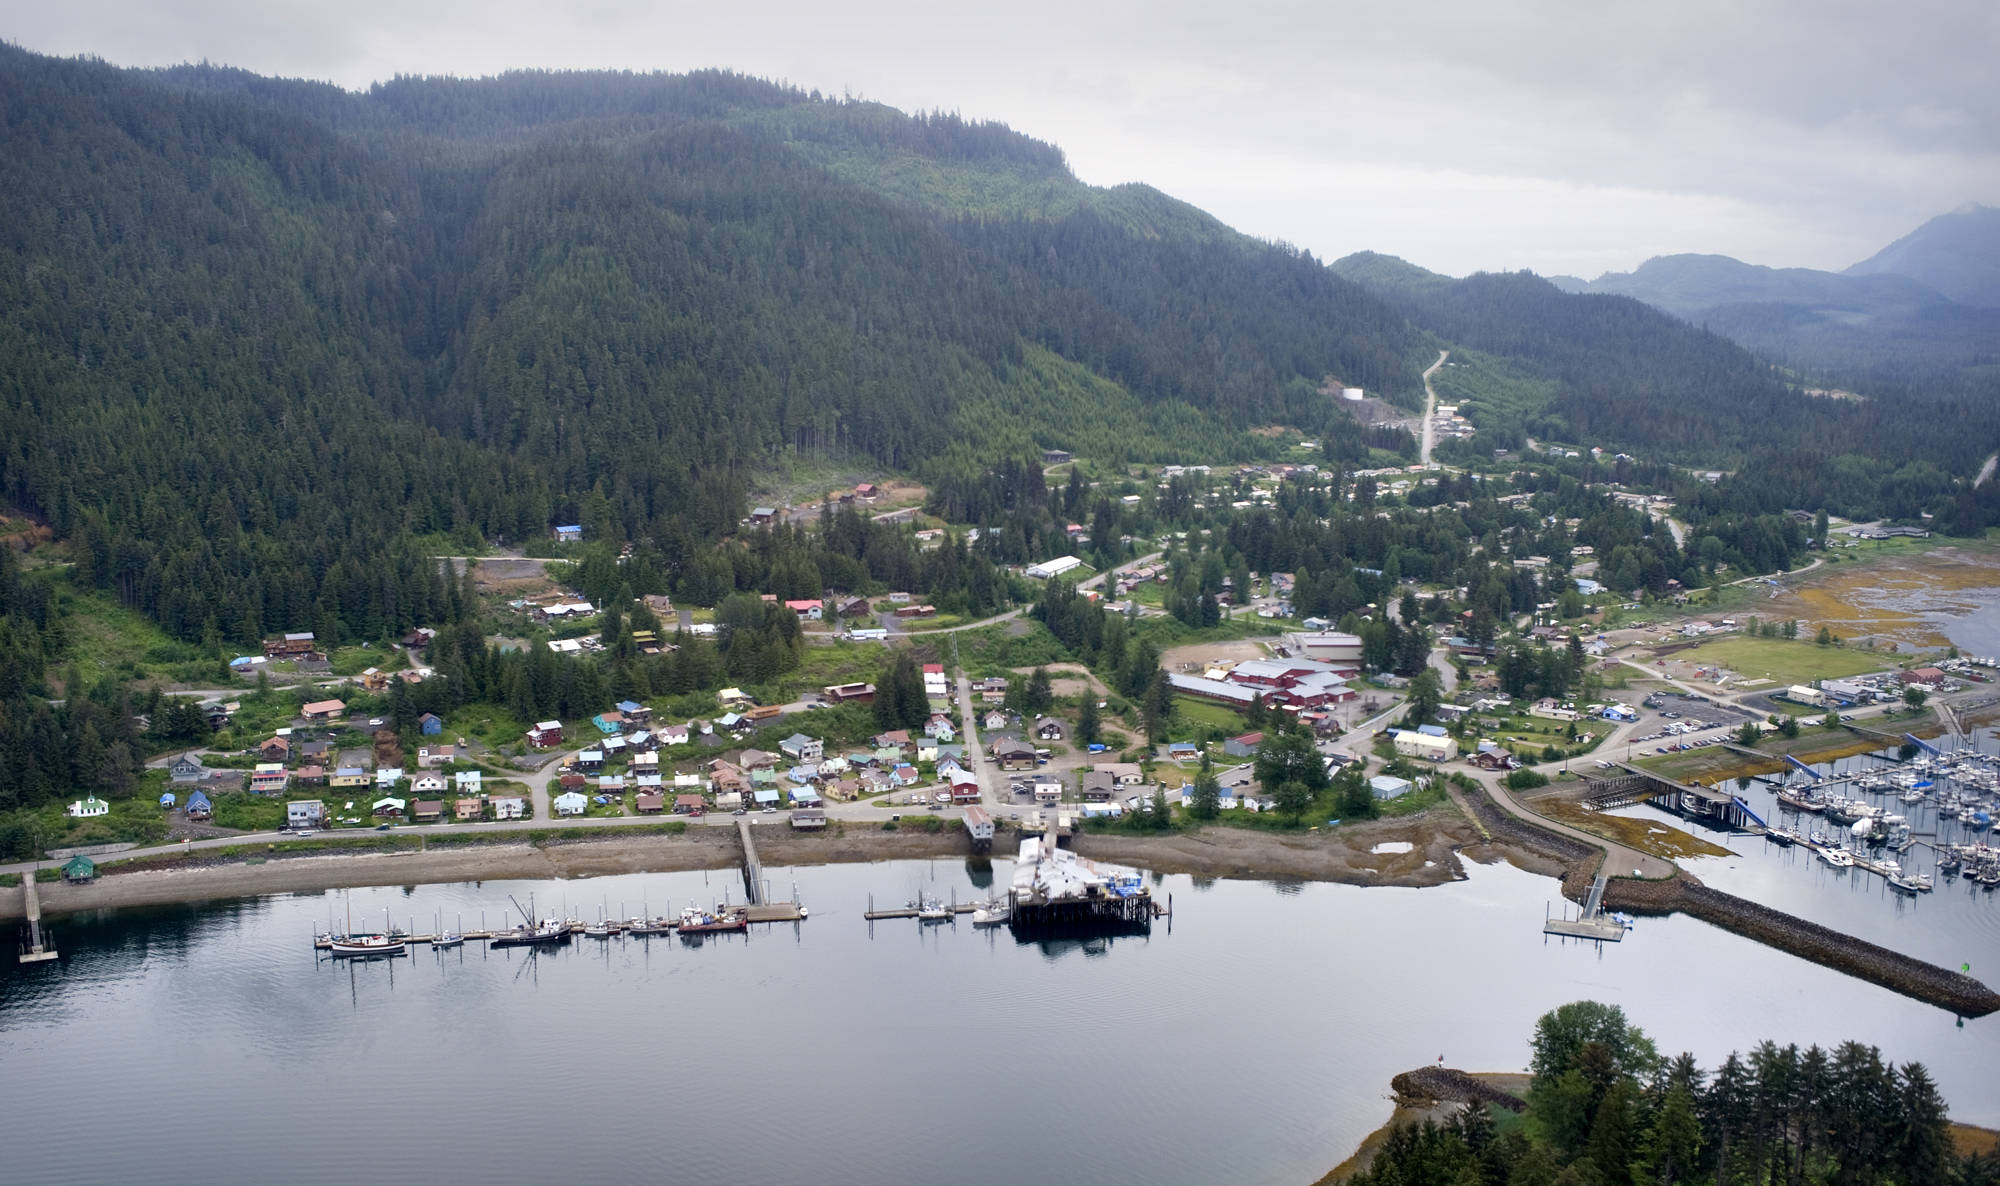 Hoonah, seen in this 2010 photo, is a village of about 800 people west of Juneau on Chichagof Island. The City of Hoonah recently filed a petition that showed plans for making a borough that would be among the largest in the state. (Michael Penn | Juneau Empire)